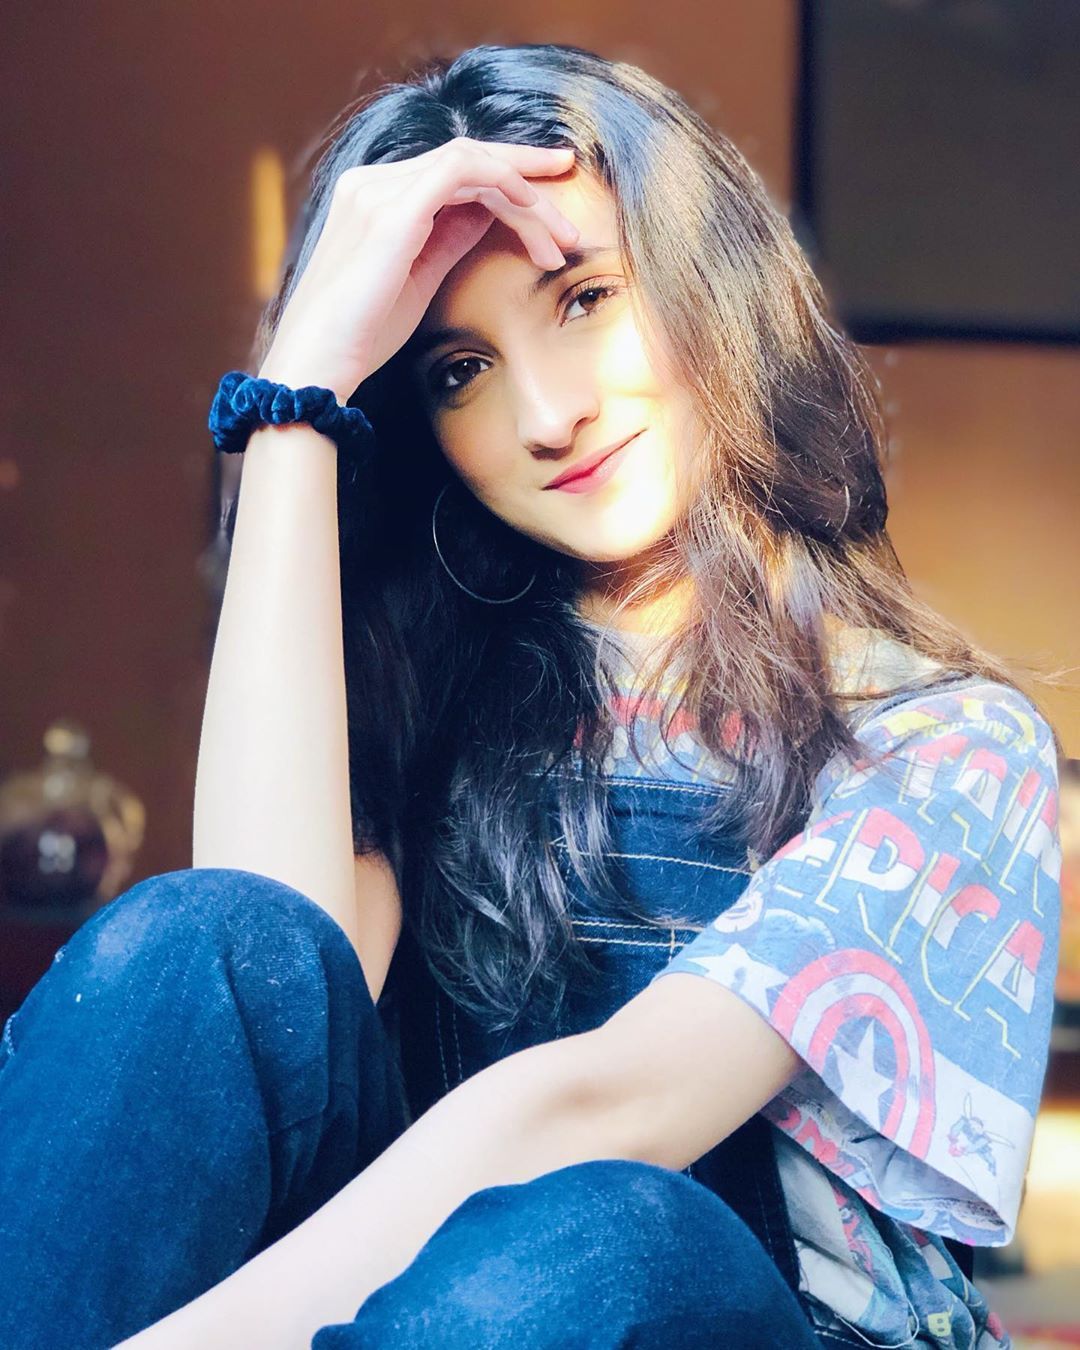 Sitting poses 👈😎🖤💓💝 Location 🥰📸☺️😙 and song #FacebookPage #newpost  #trending #song #viralpost Itz Roshan 💗📸💗💗 #trend 💕 #pose #instagram…  | Instagram